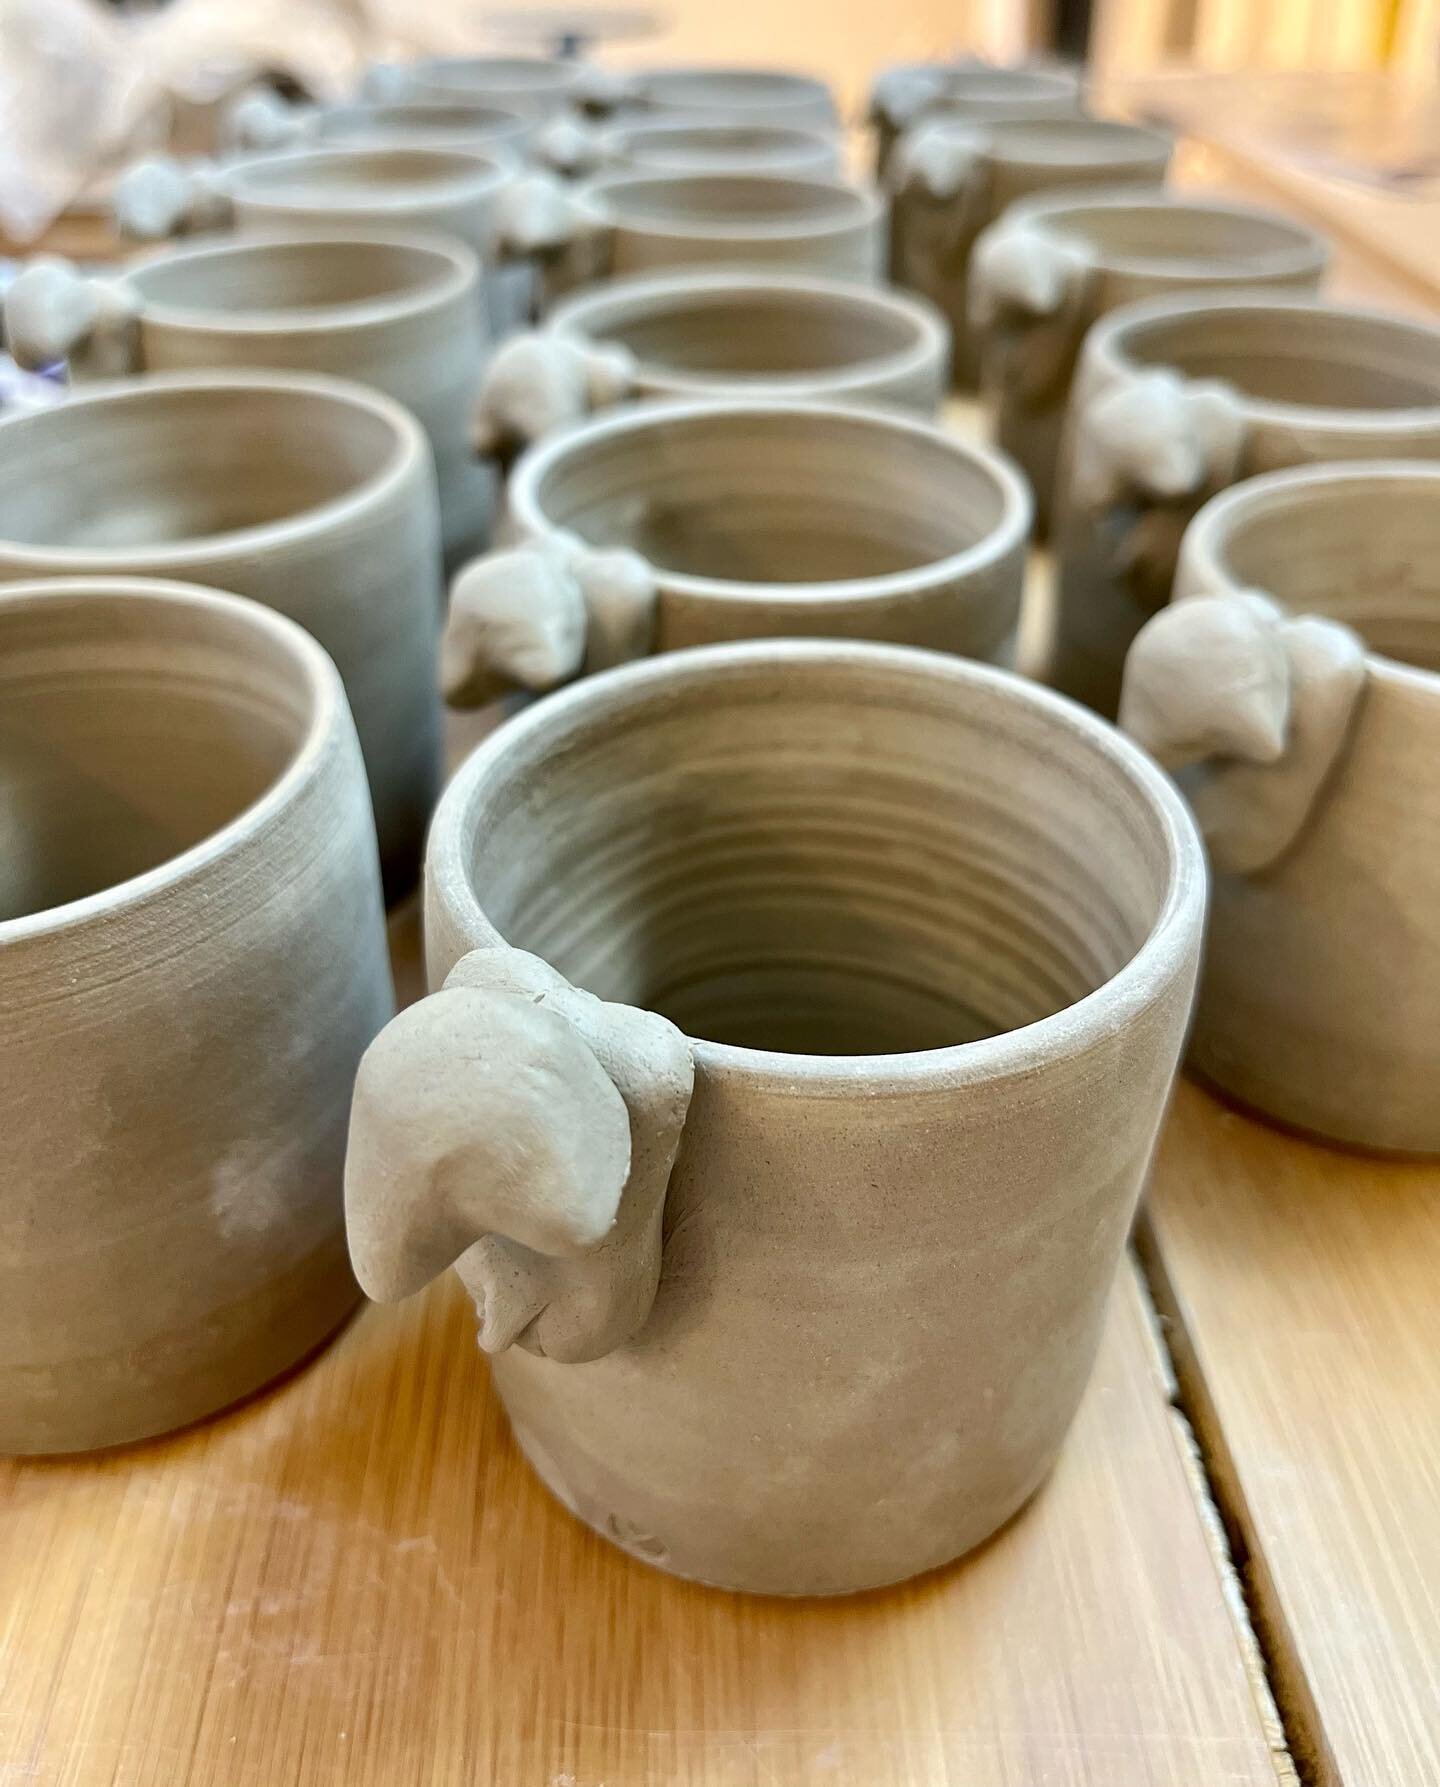 Lots of little Nyanko cups in production this week. I&rsquo;m building up for restocking online shop for late summer. 

#ceramiccat #ceramicstudio #potterystudio #claycat #catcup #espressocup #yunomi